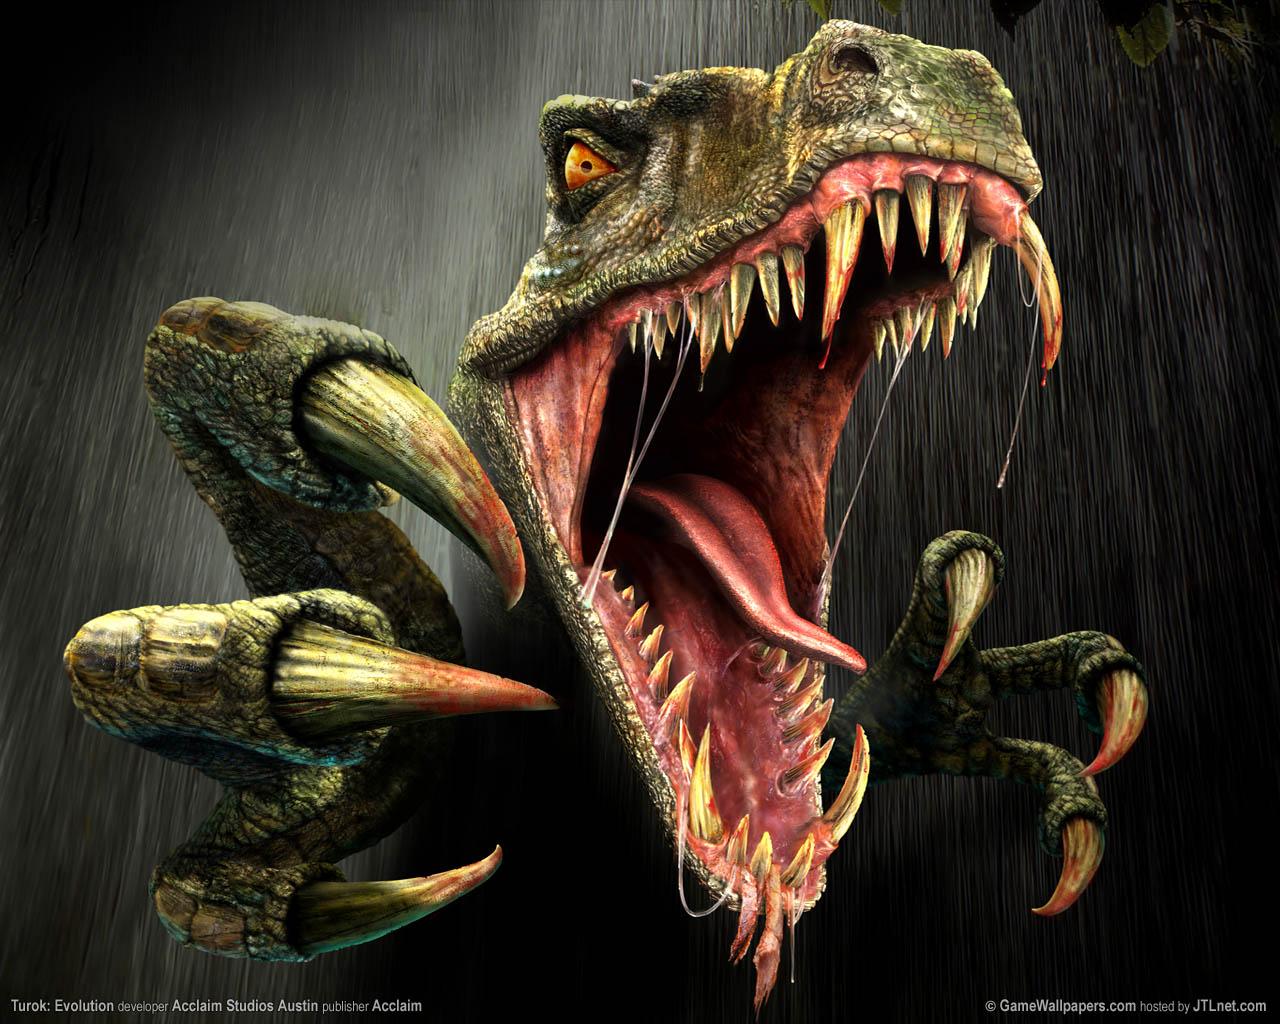 Dinosaur Image Dinosaurs Pictures Real Wallpaper